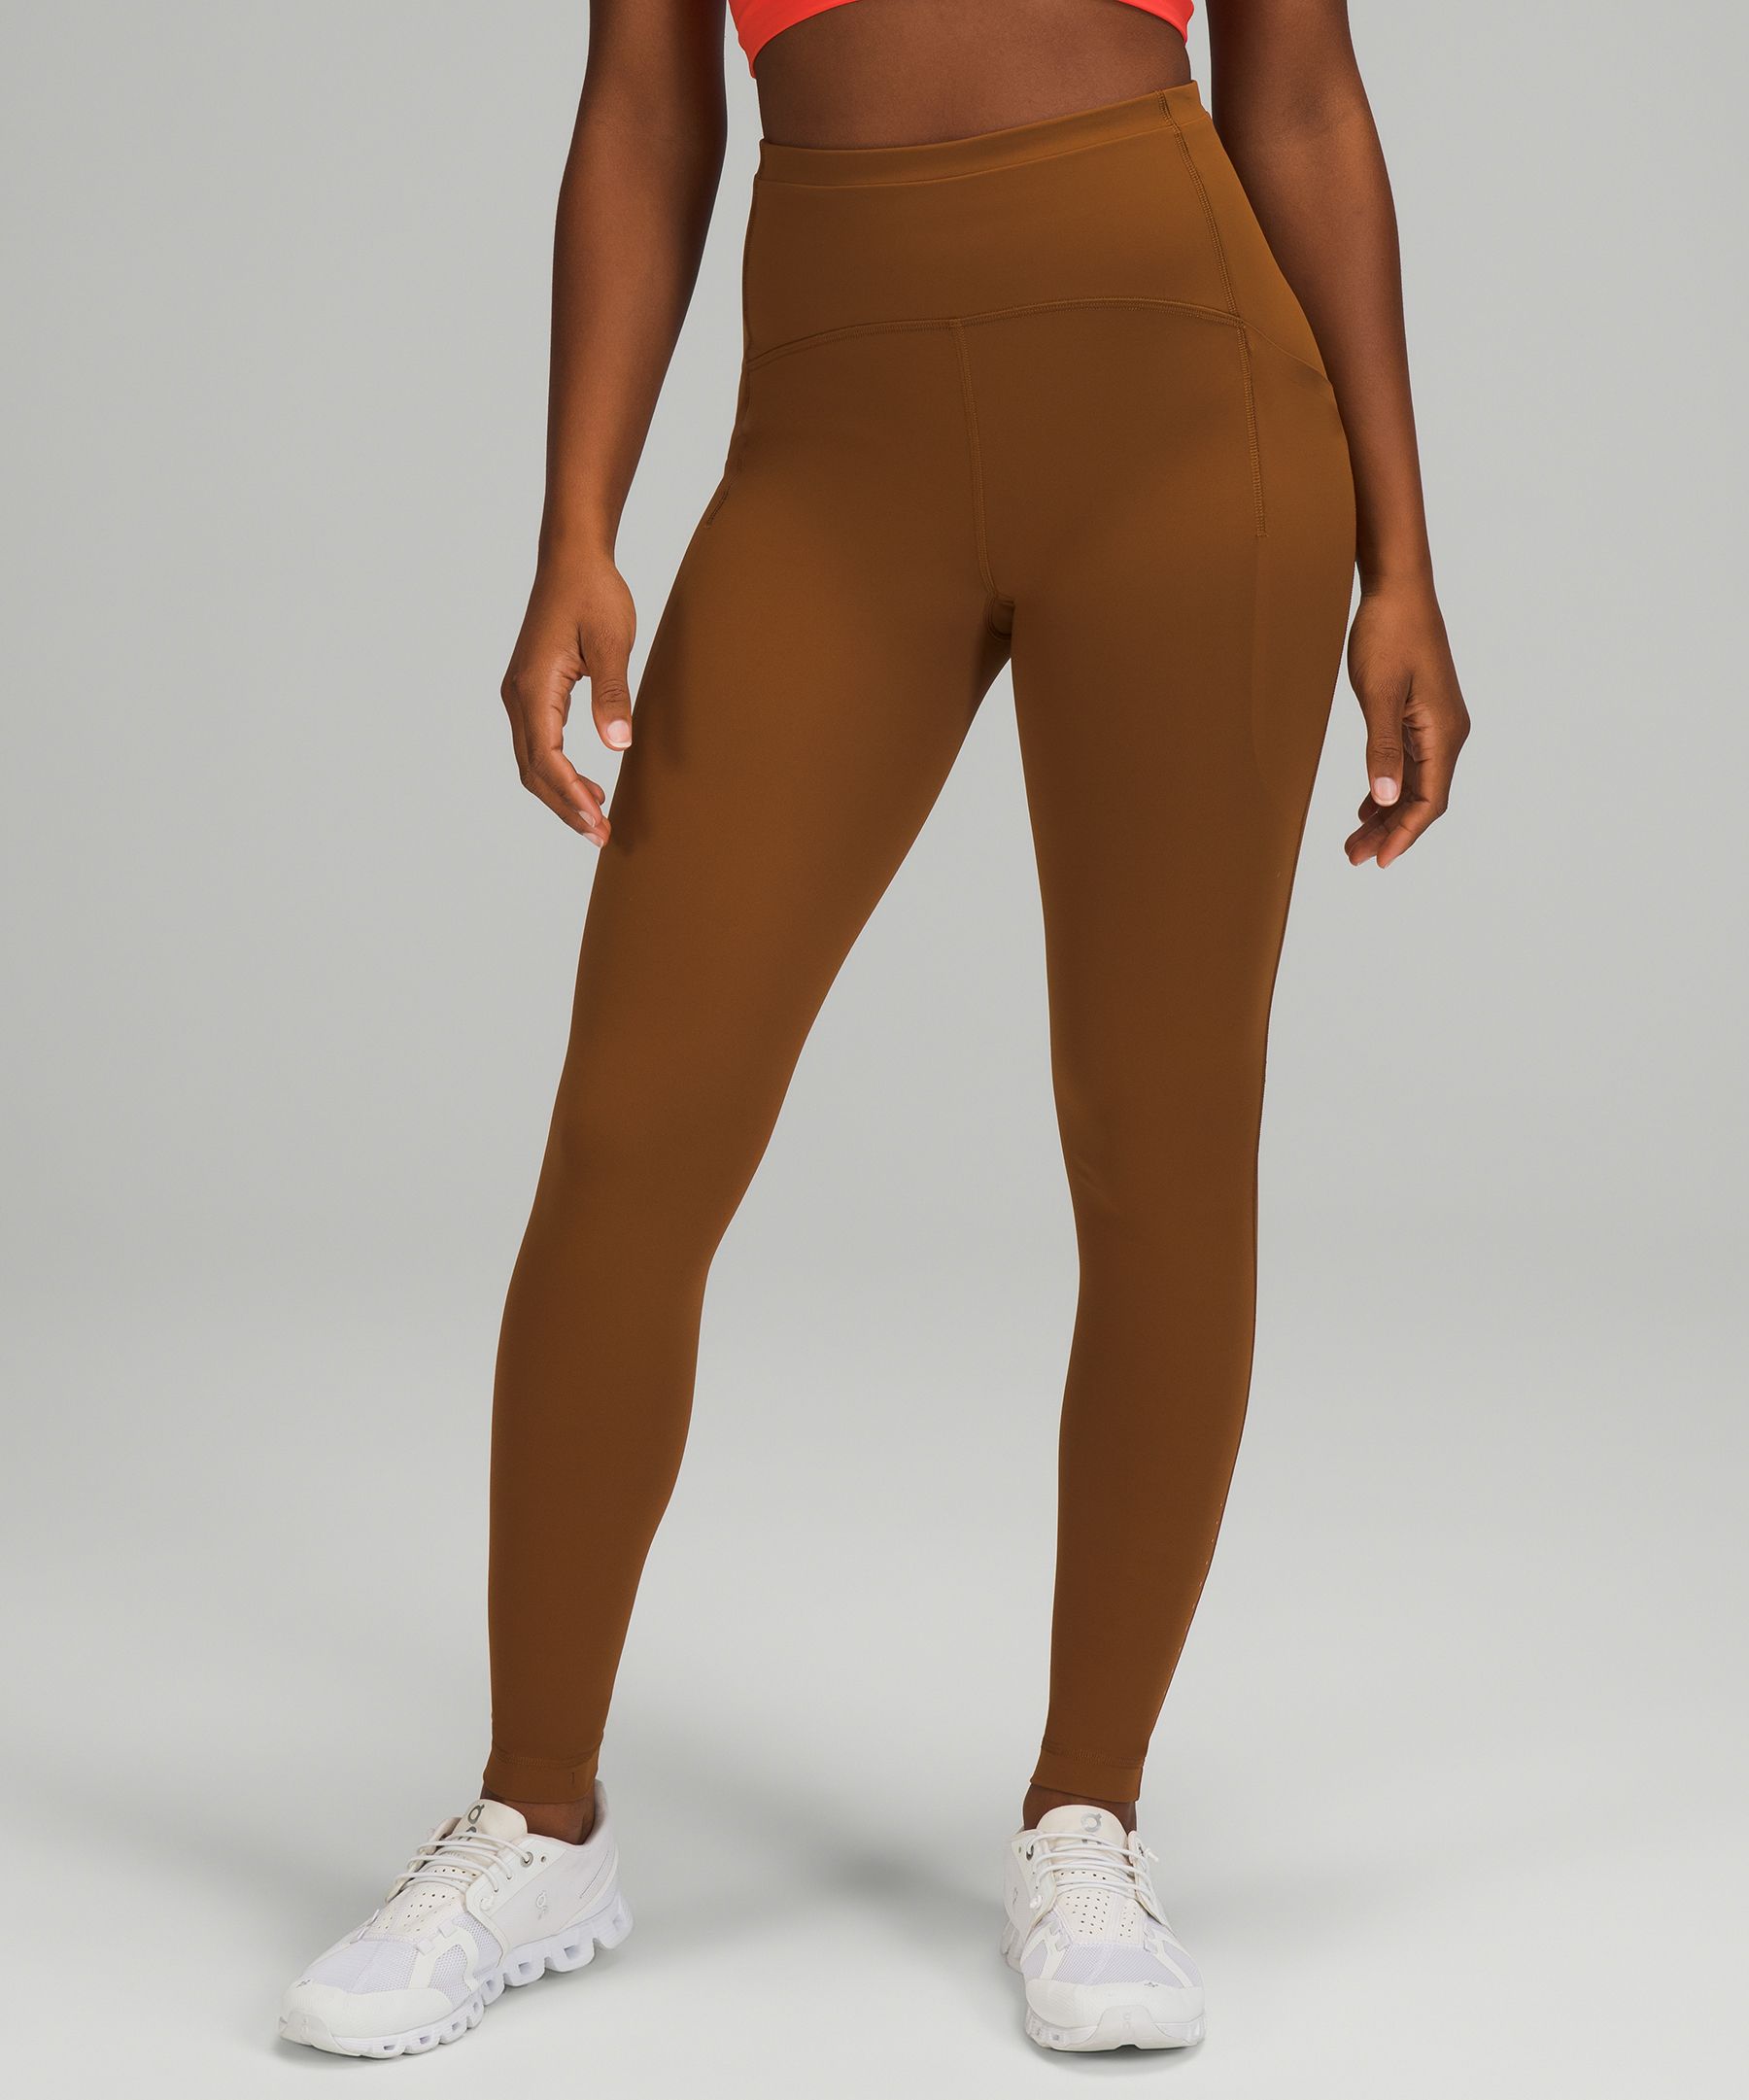 Lululemon Swift Speed High-rise Tights 28" In Copper Brown